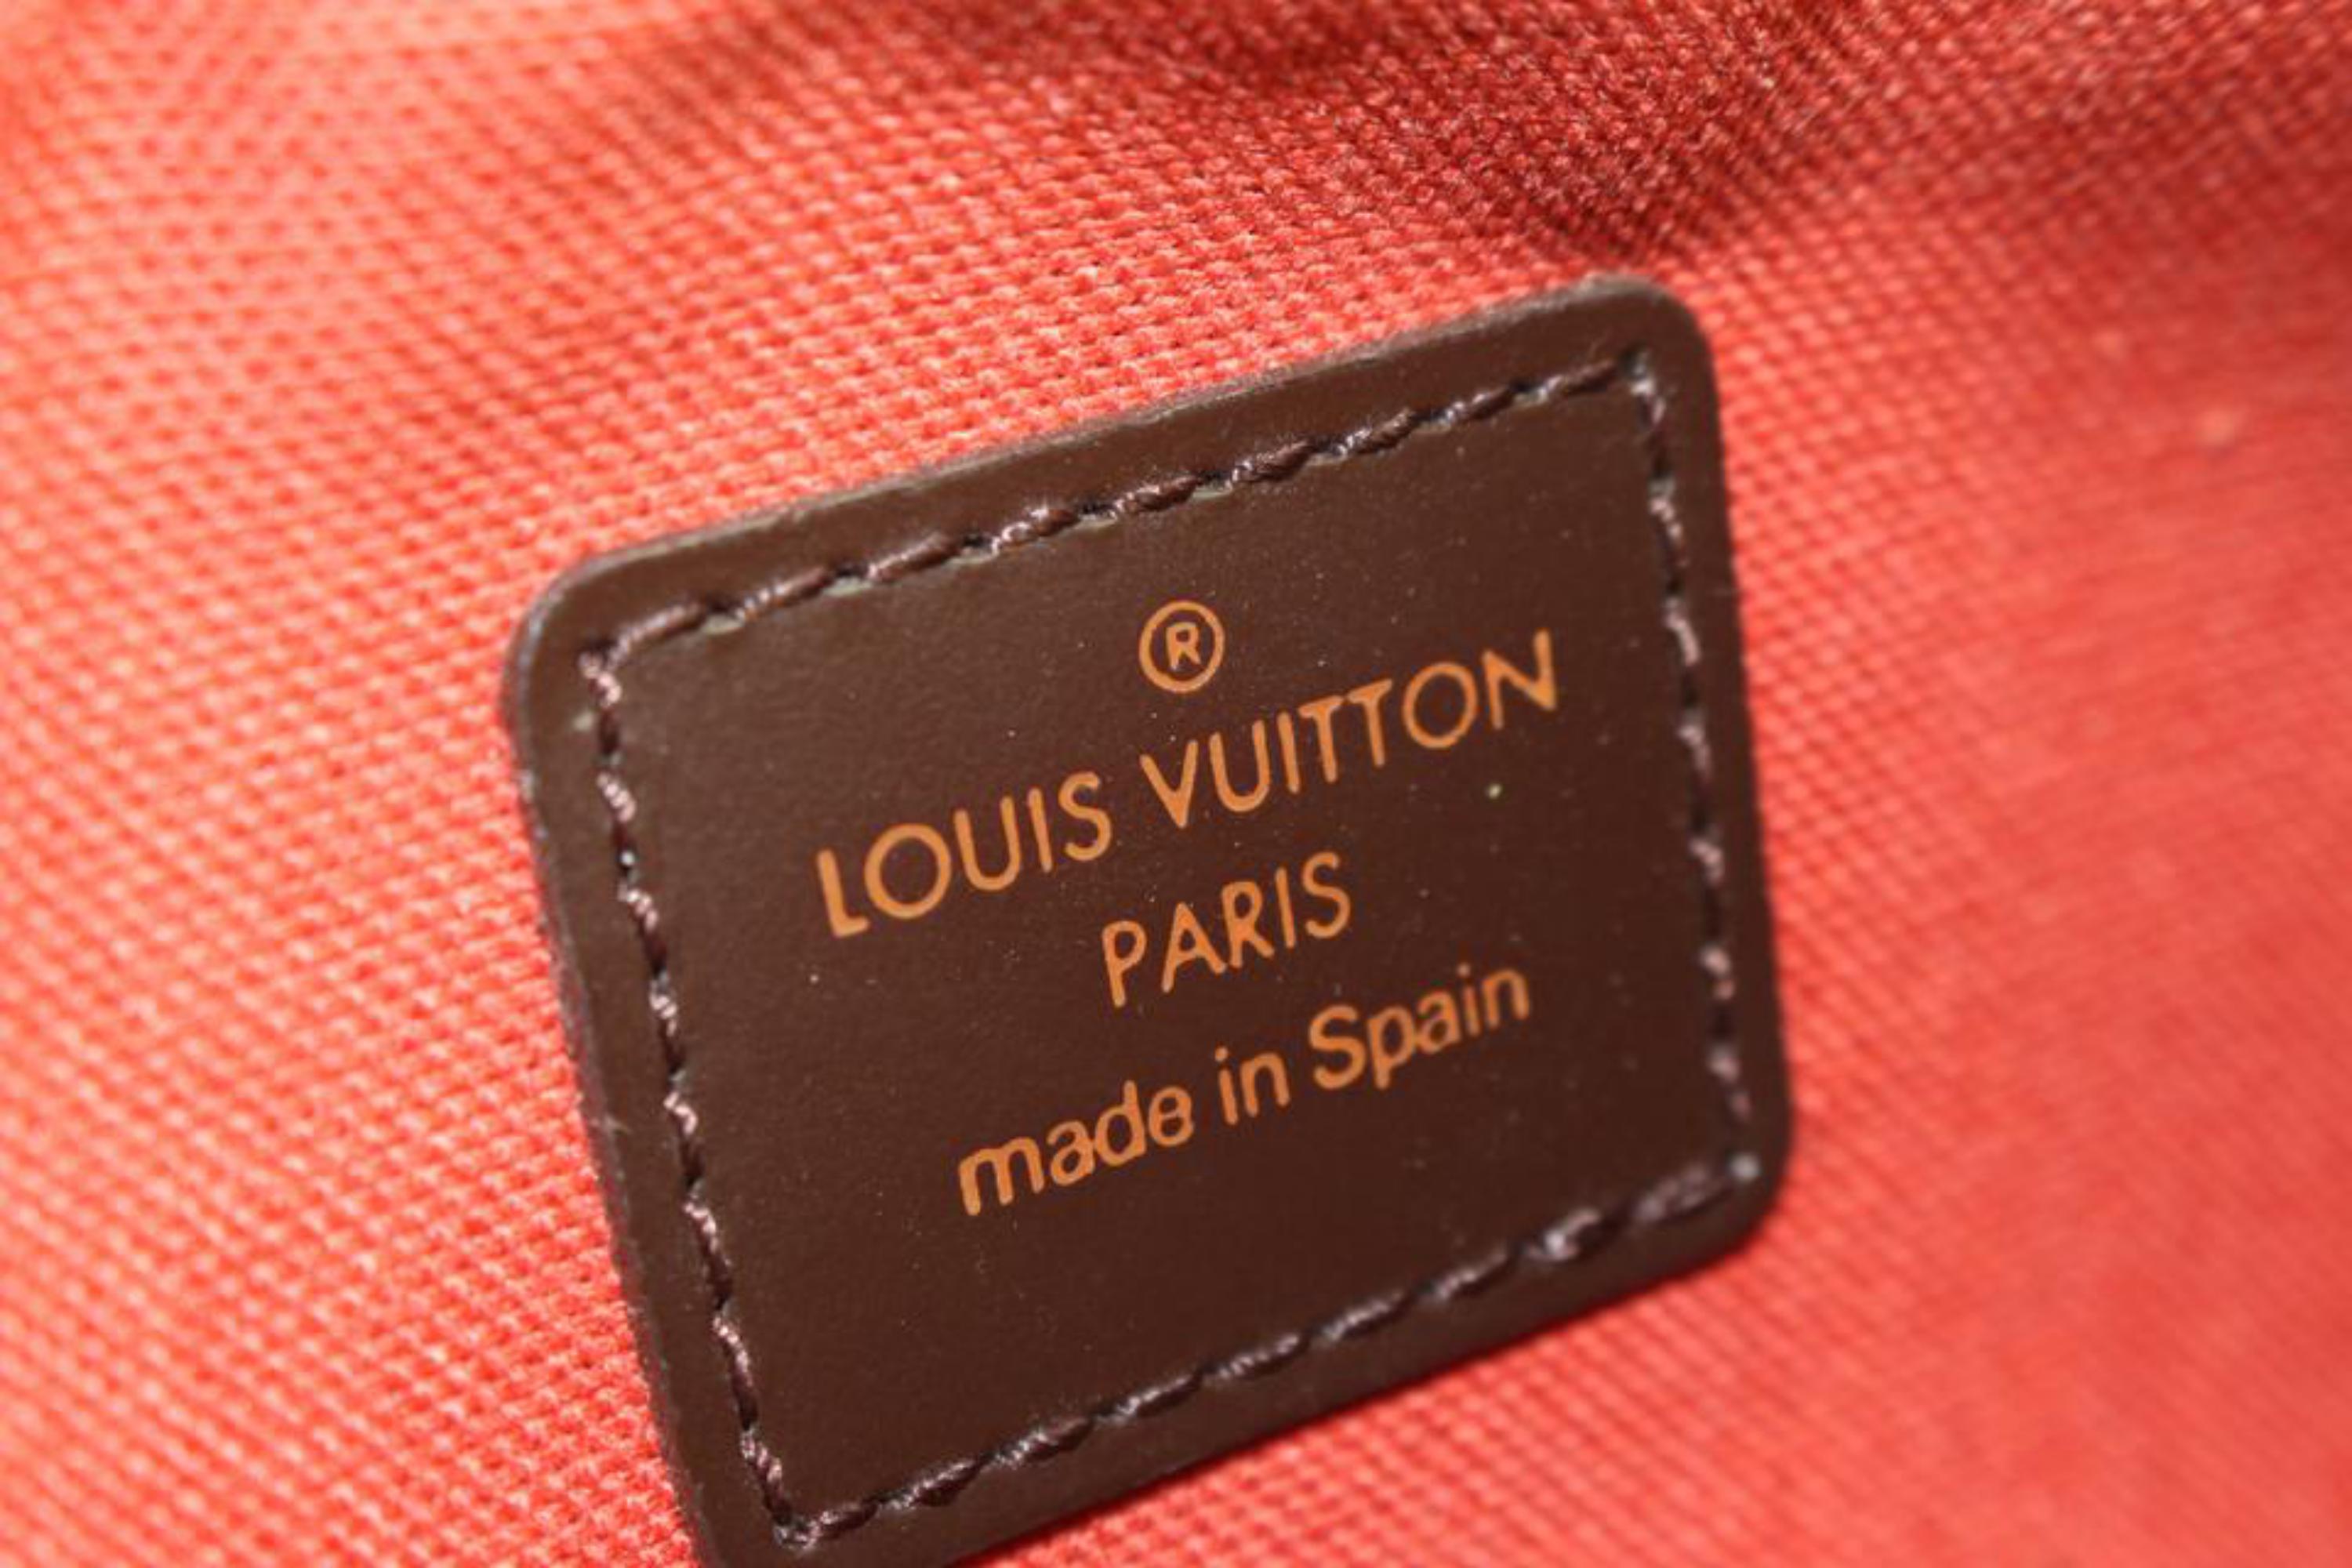 louis vuitton made in spain stamp